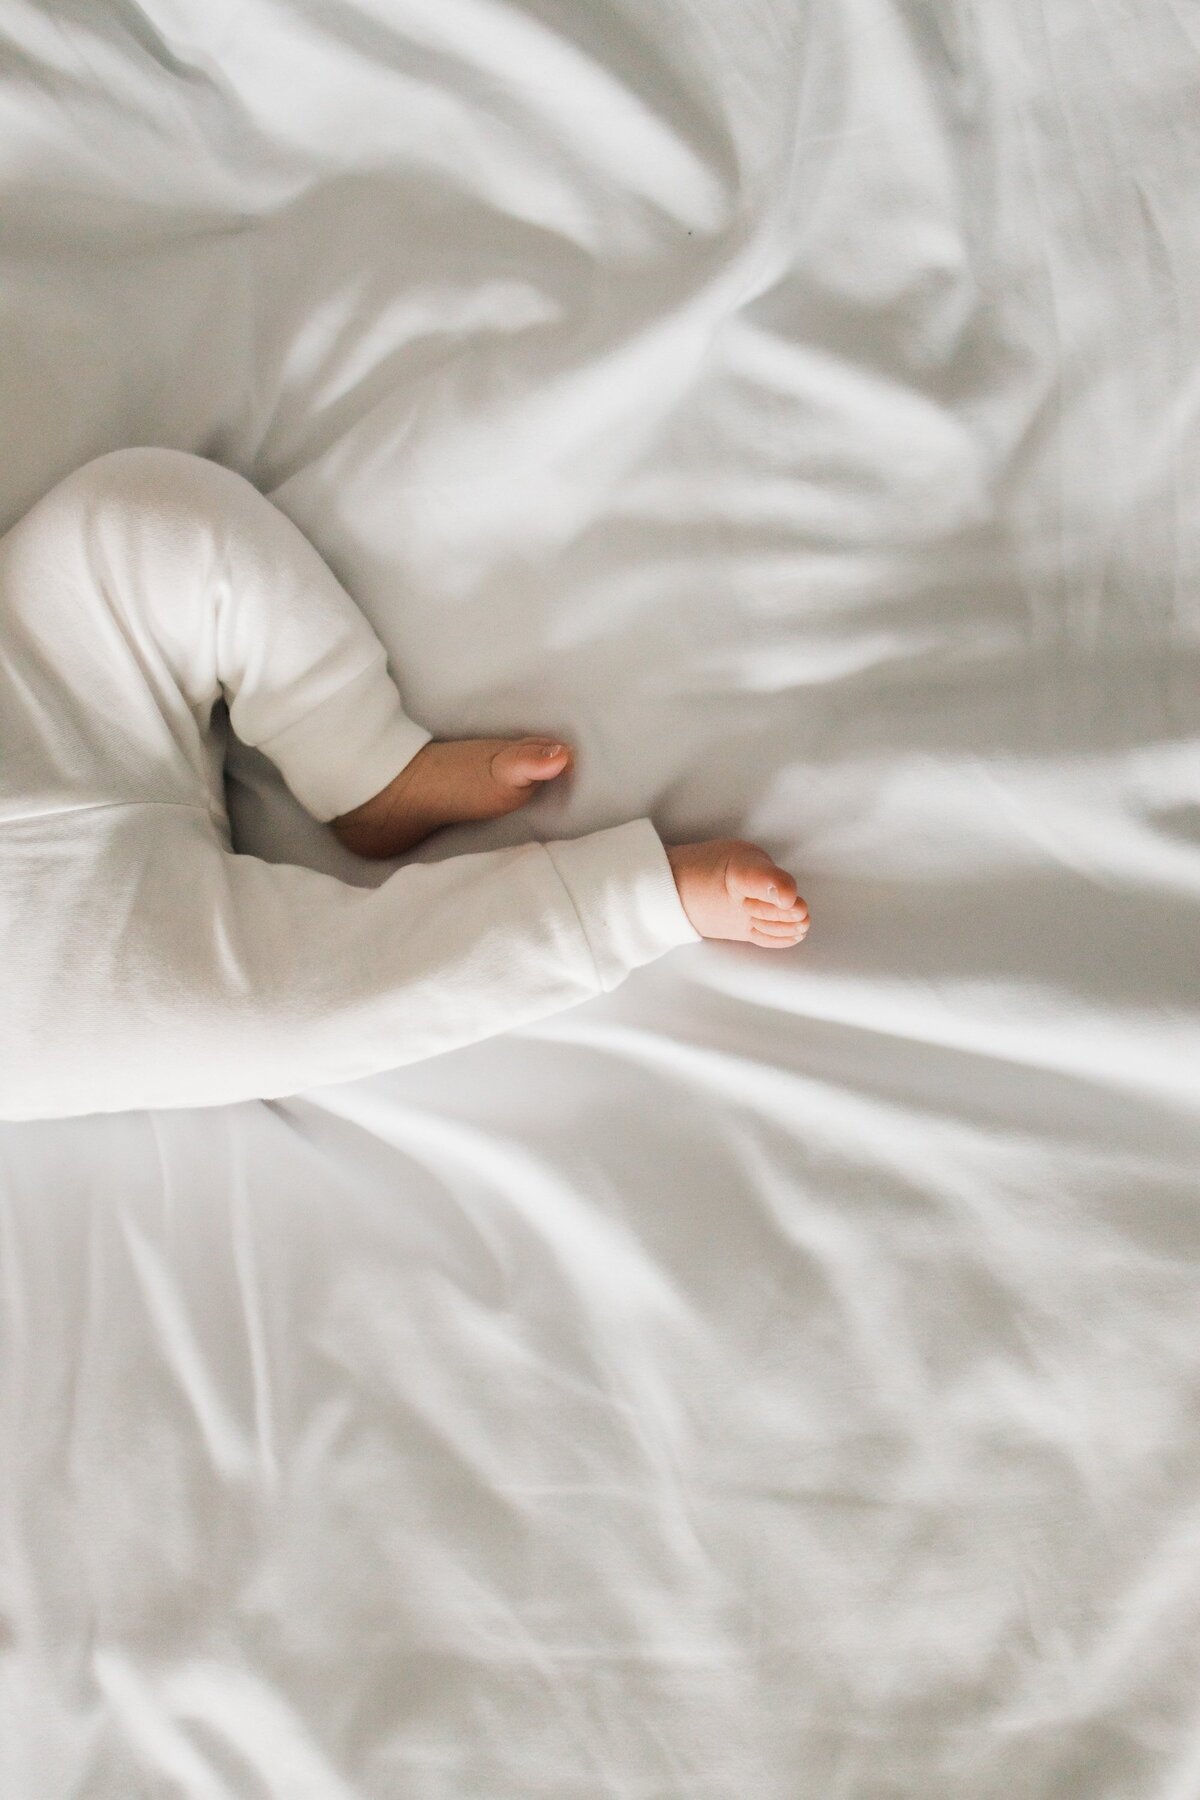 Child in white pajamas lying under white bedcovers with only feet and one arm visible, captured during an in-home newborn photography session.